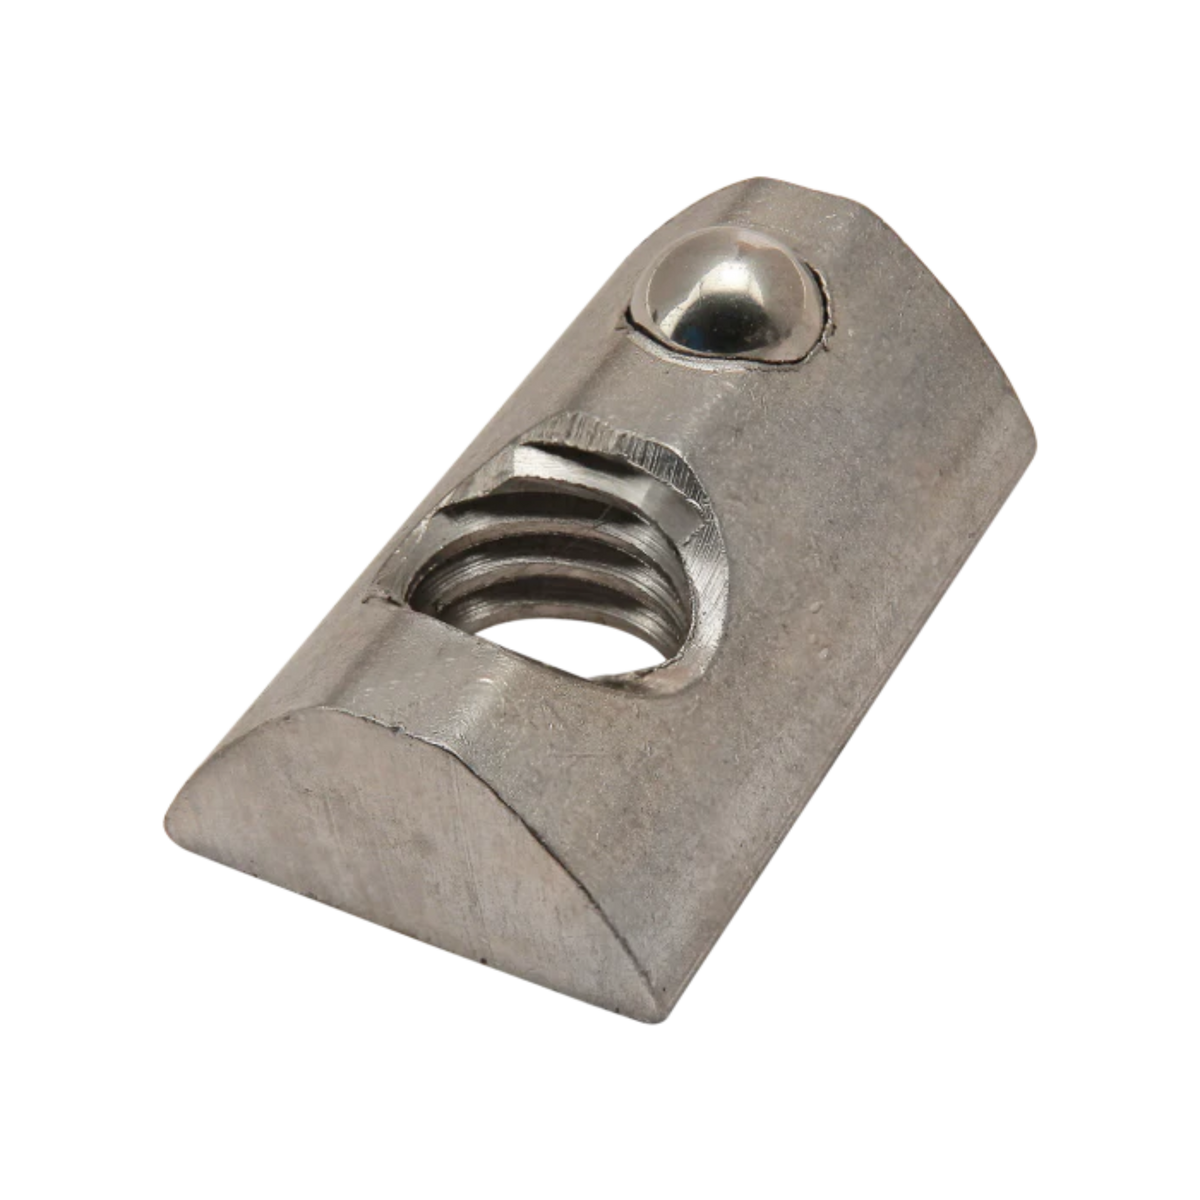 metal, rectangular t-nut with a flat bottom, a rounded top, a threaded hole on one end and a ball spring on the other end